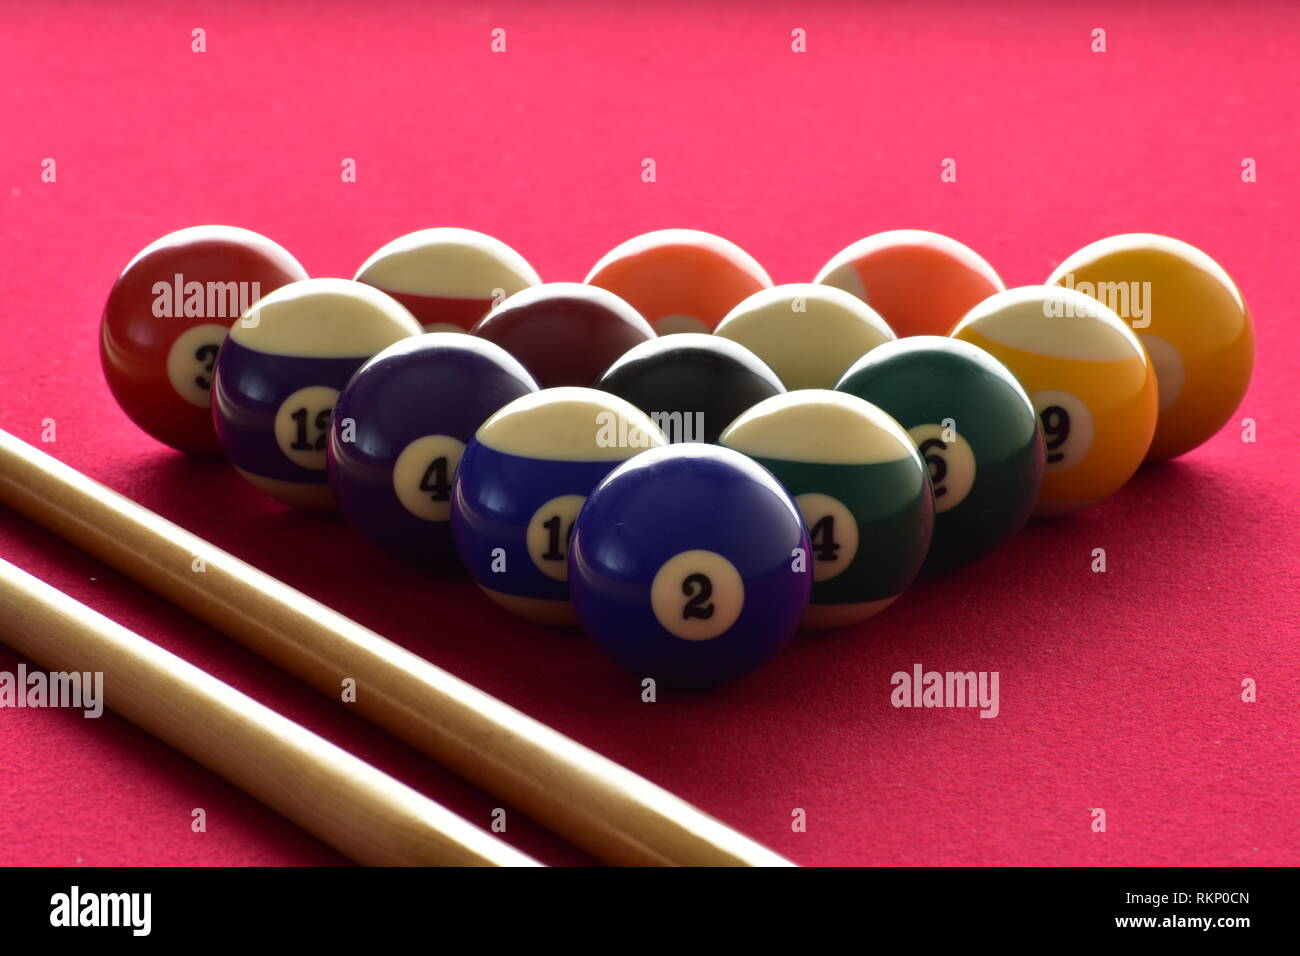 Numbered billiard balls with two pool cues on a red felt table. Stock Photo